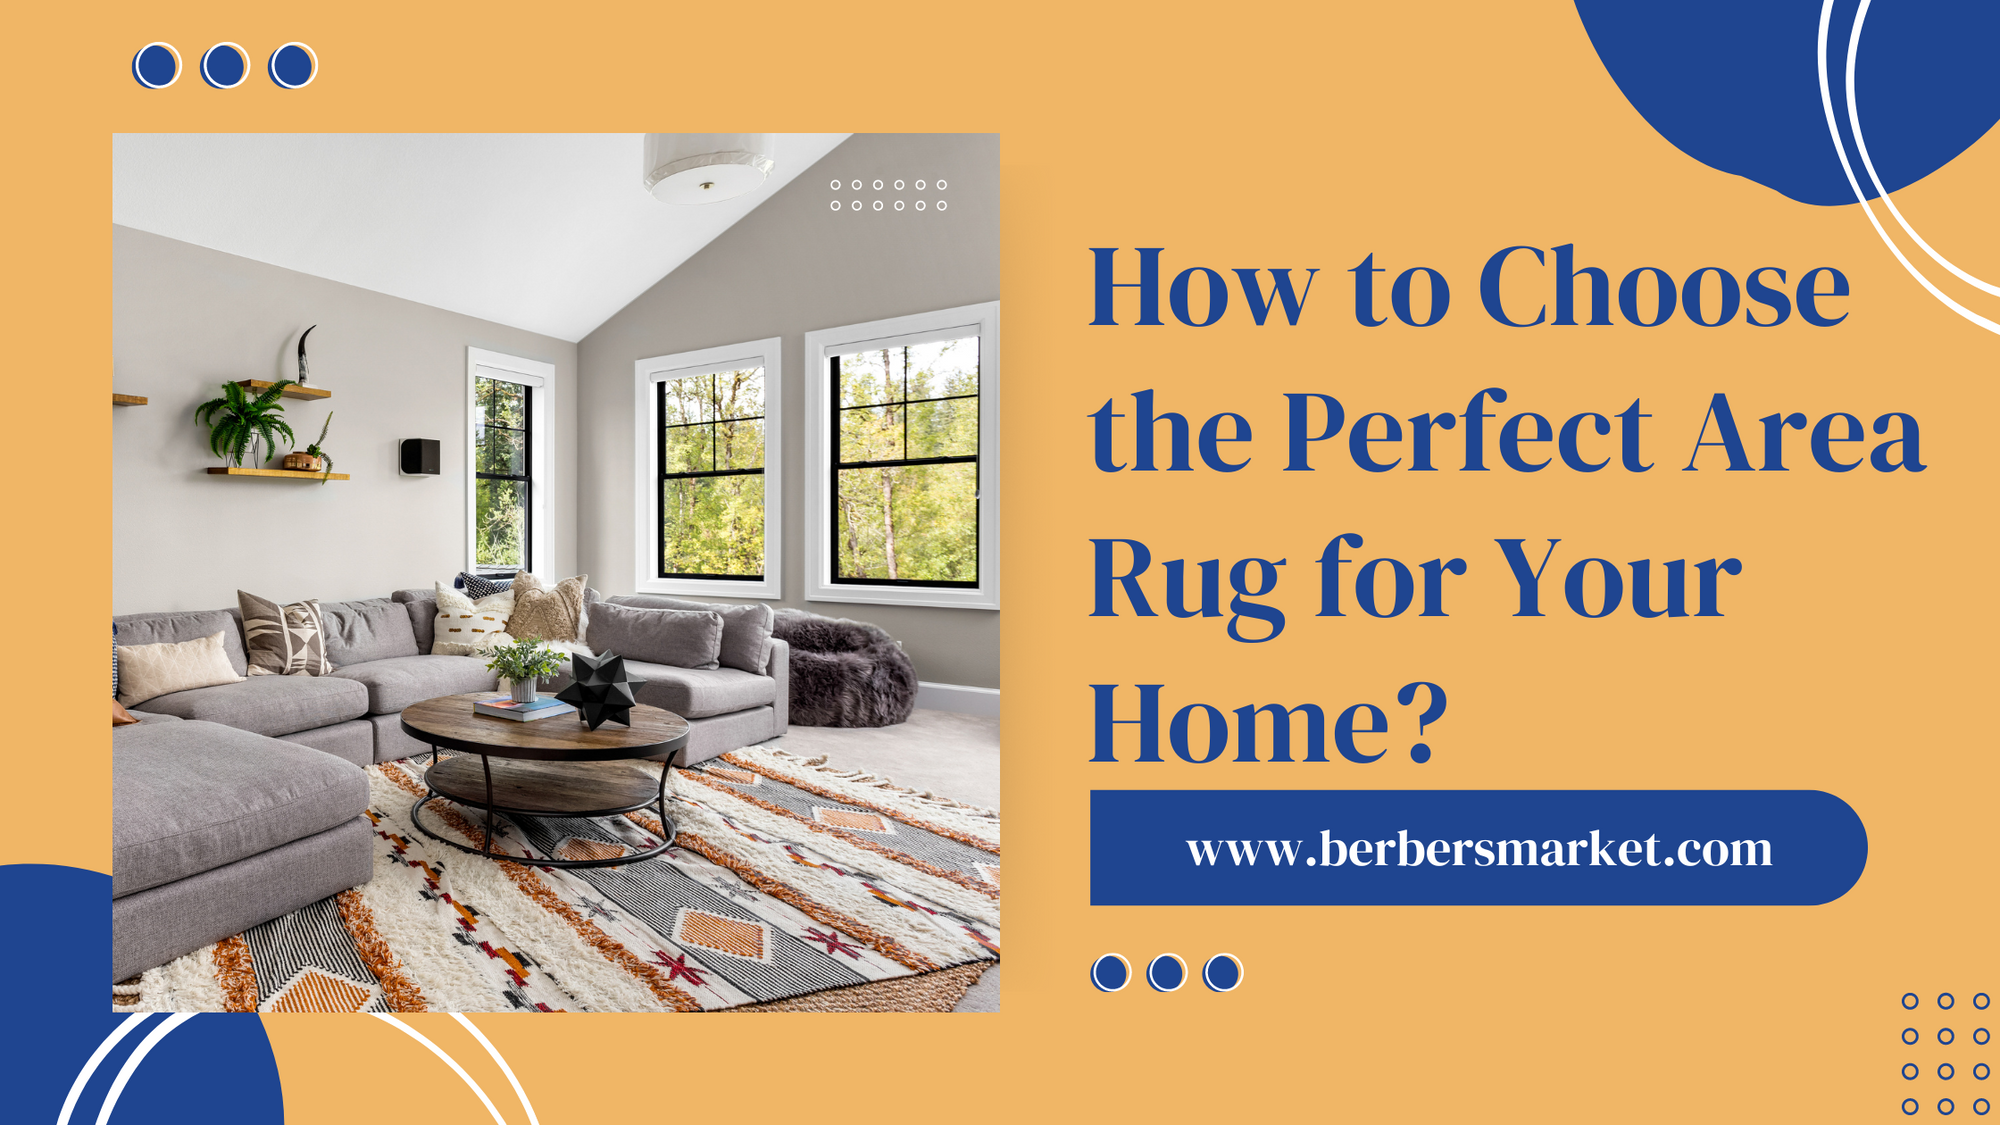 Blog banner talking about: "How to Choose the Perfect Area Rug for Your Home?" with a picture showing a modern living room interior.